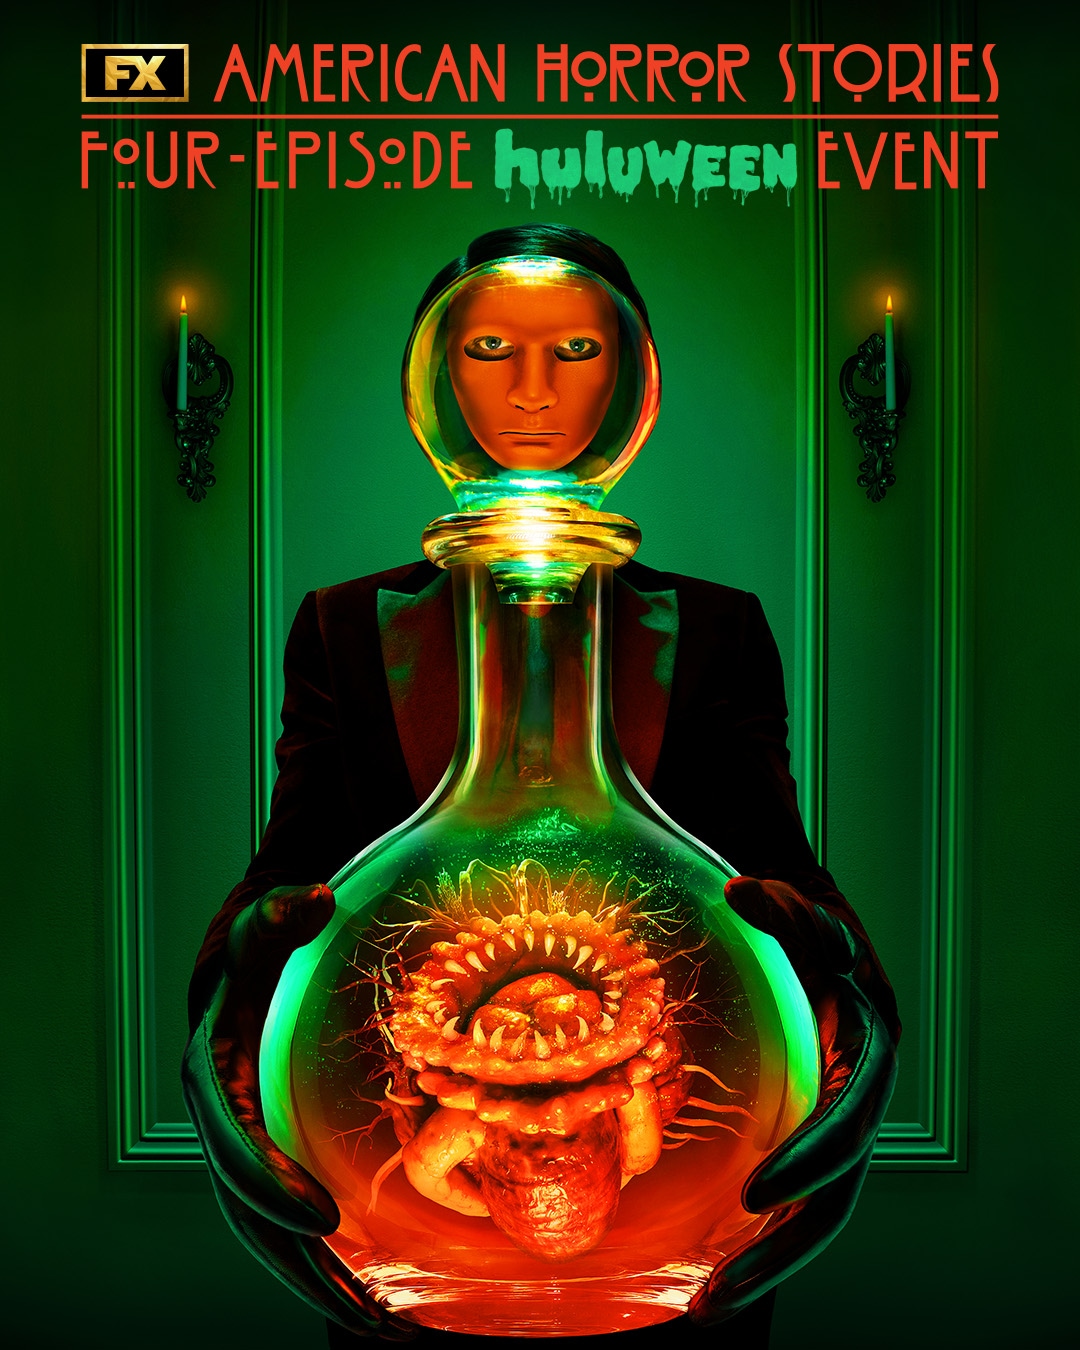 Figure in red mask holding glass vase with sharp-toothed creature in it for FX’s American Horror Stories Huluween event